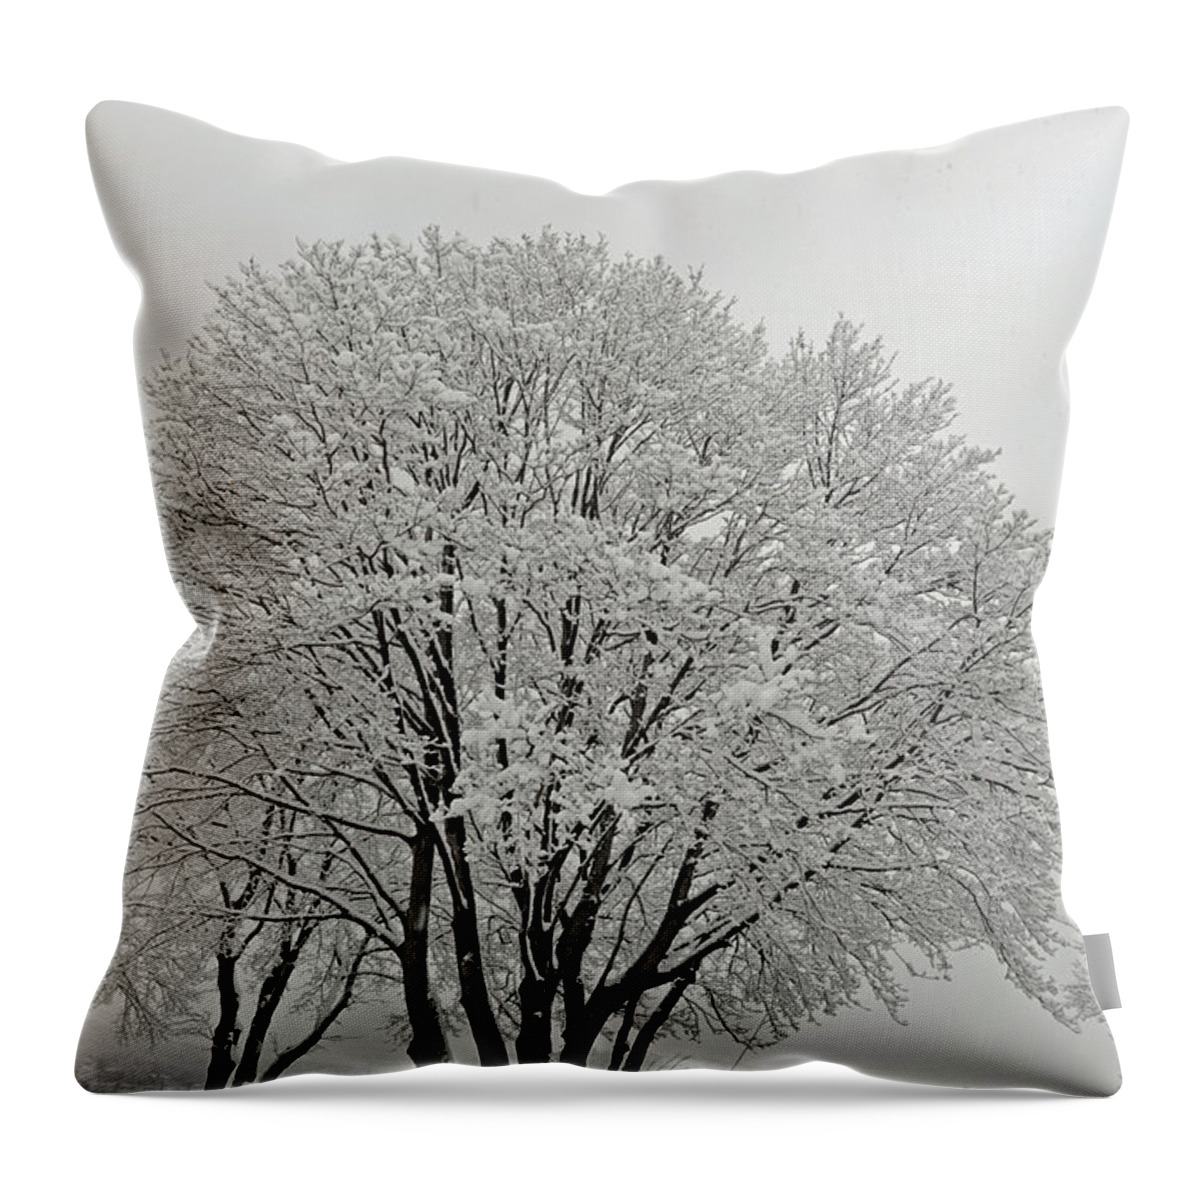 Snow Throw Pillow featuring the photograph Snowy Trees by Richard Bryce and Family